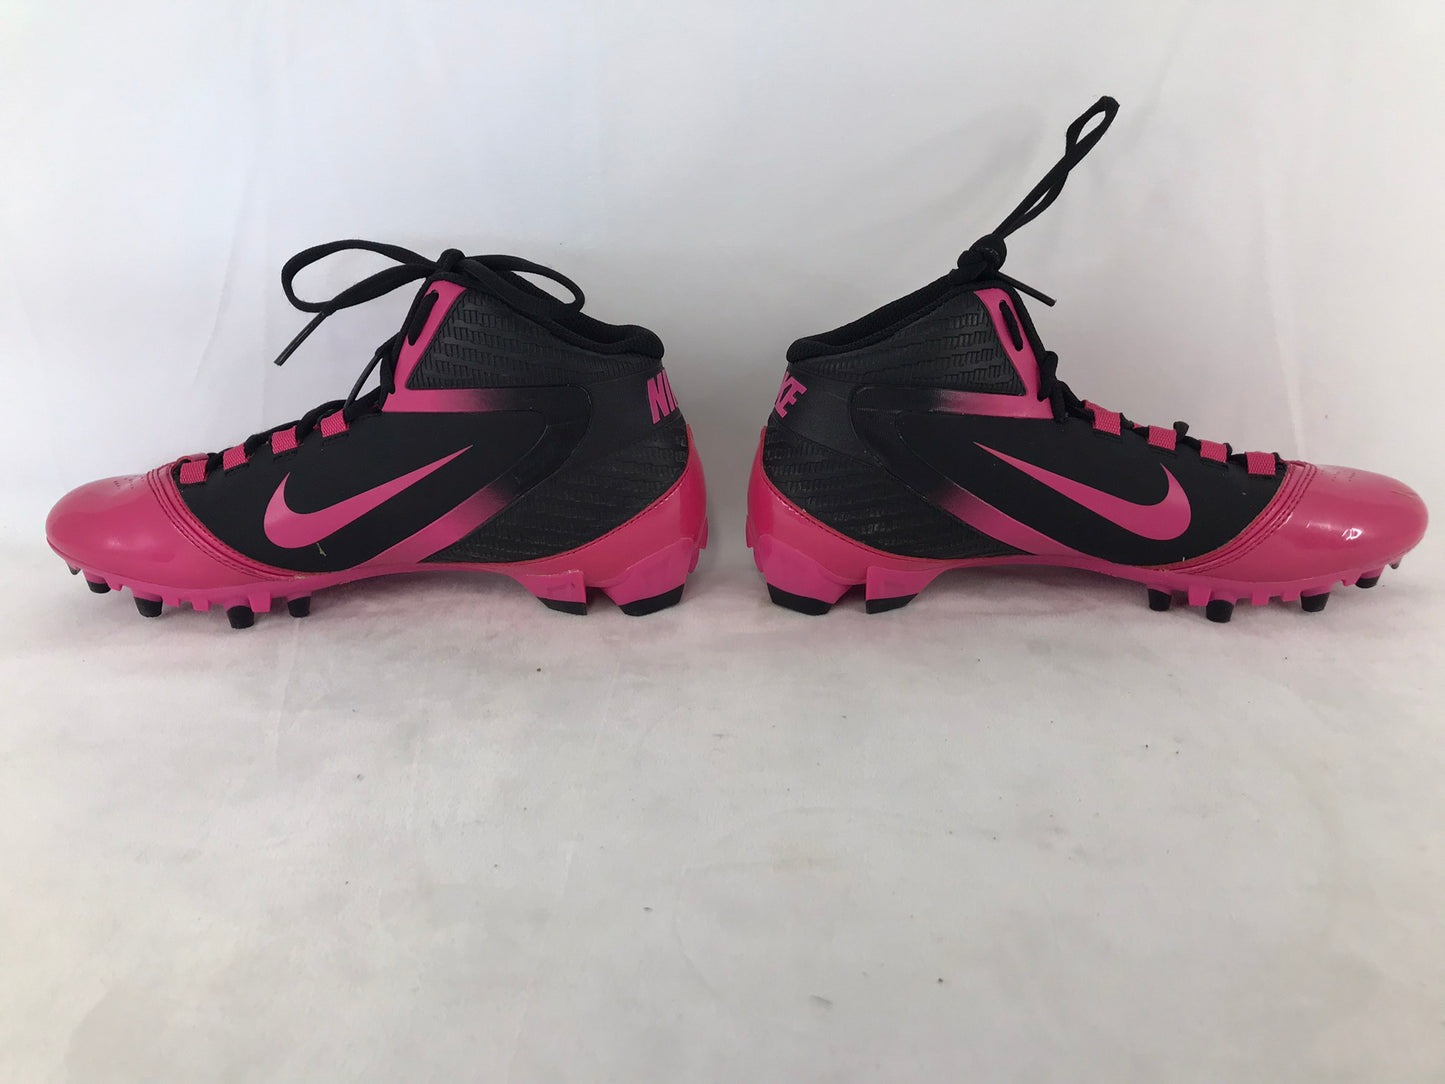 Football Rugby Cleats Men's Size 8 Nike Alpha Speed Fushia Black As New